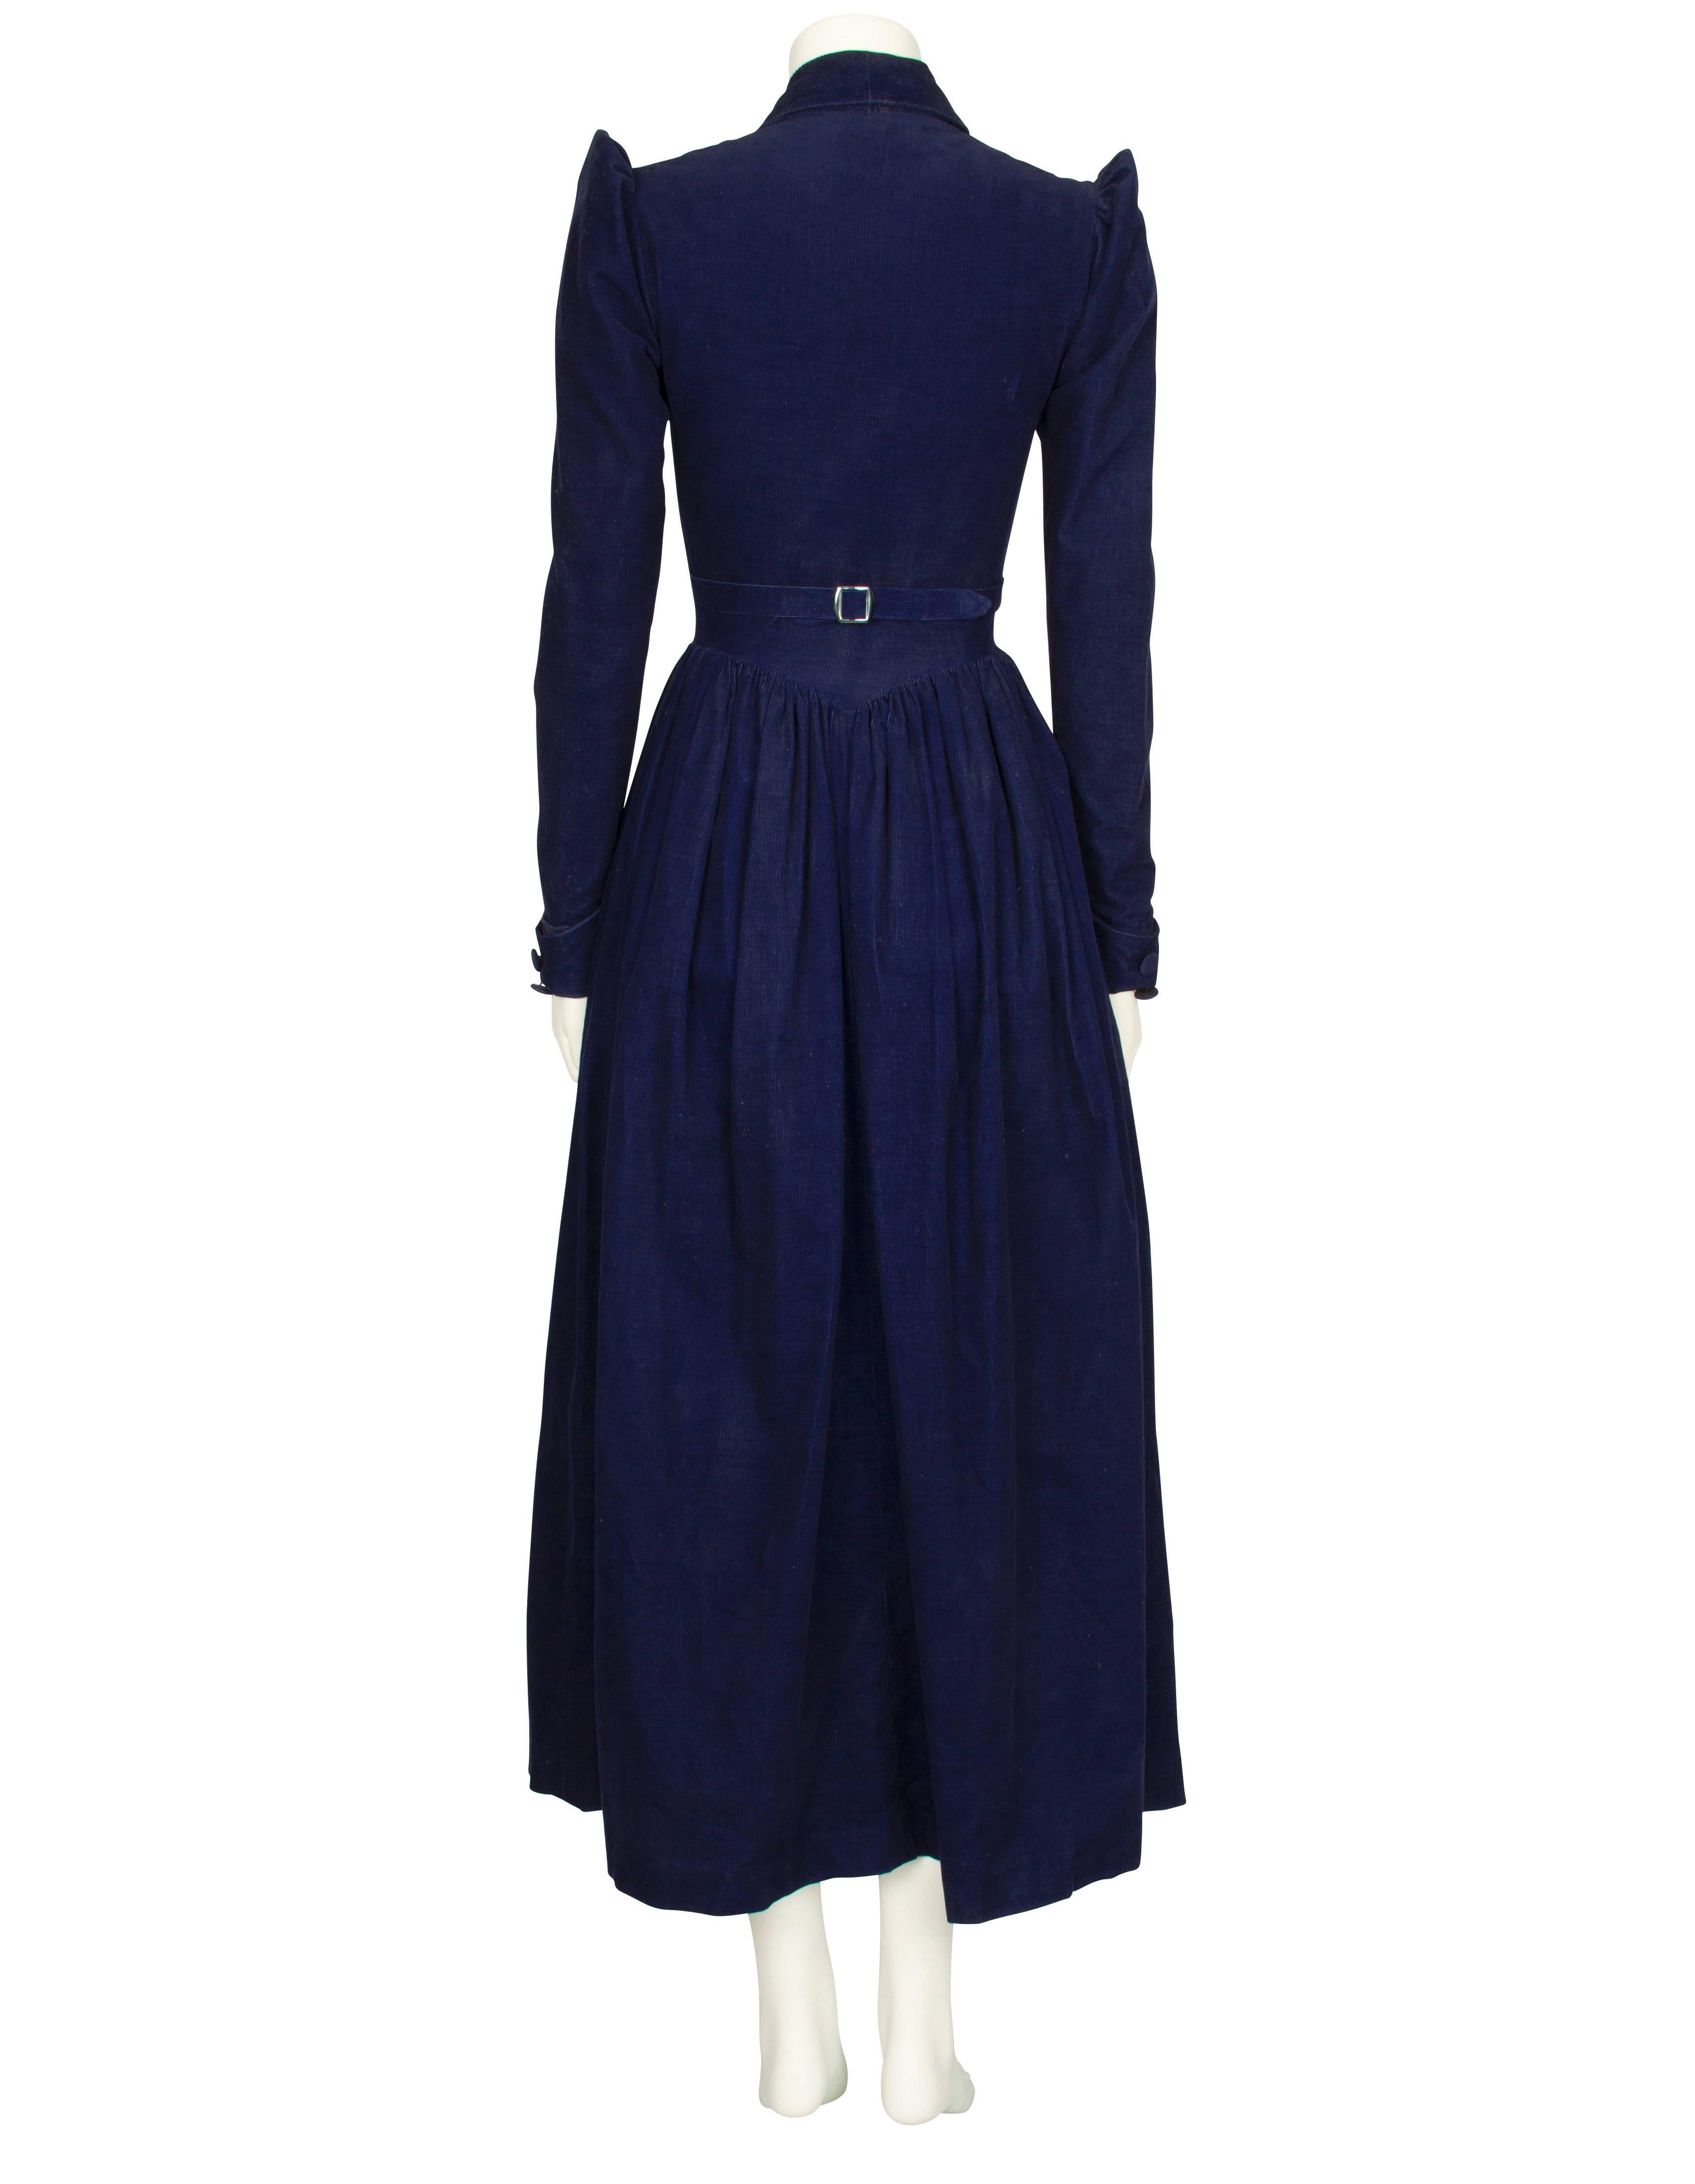 Black 1970s Pollen London Navy Corduroy Double Breasted Dress 